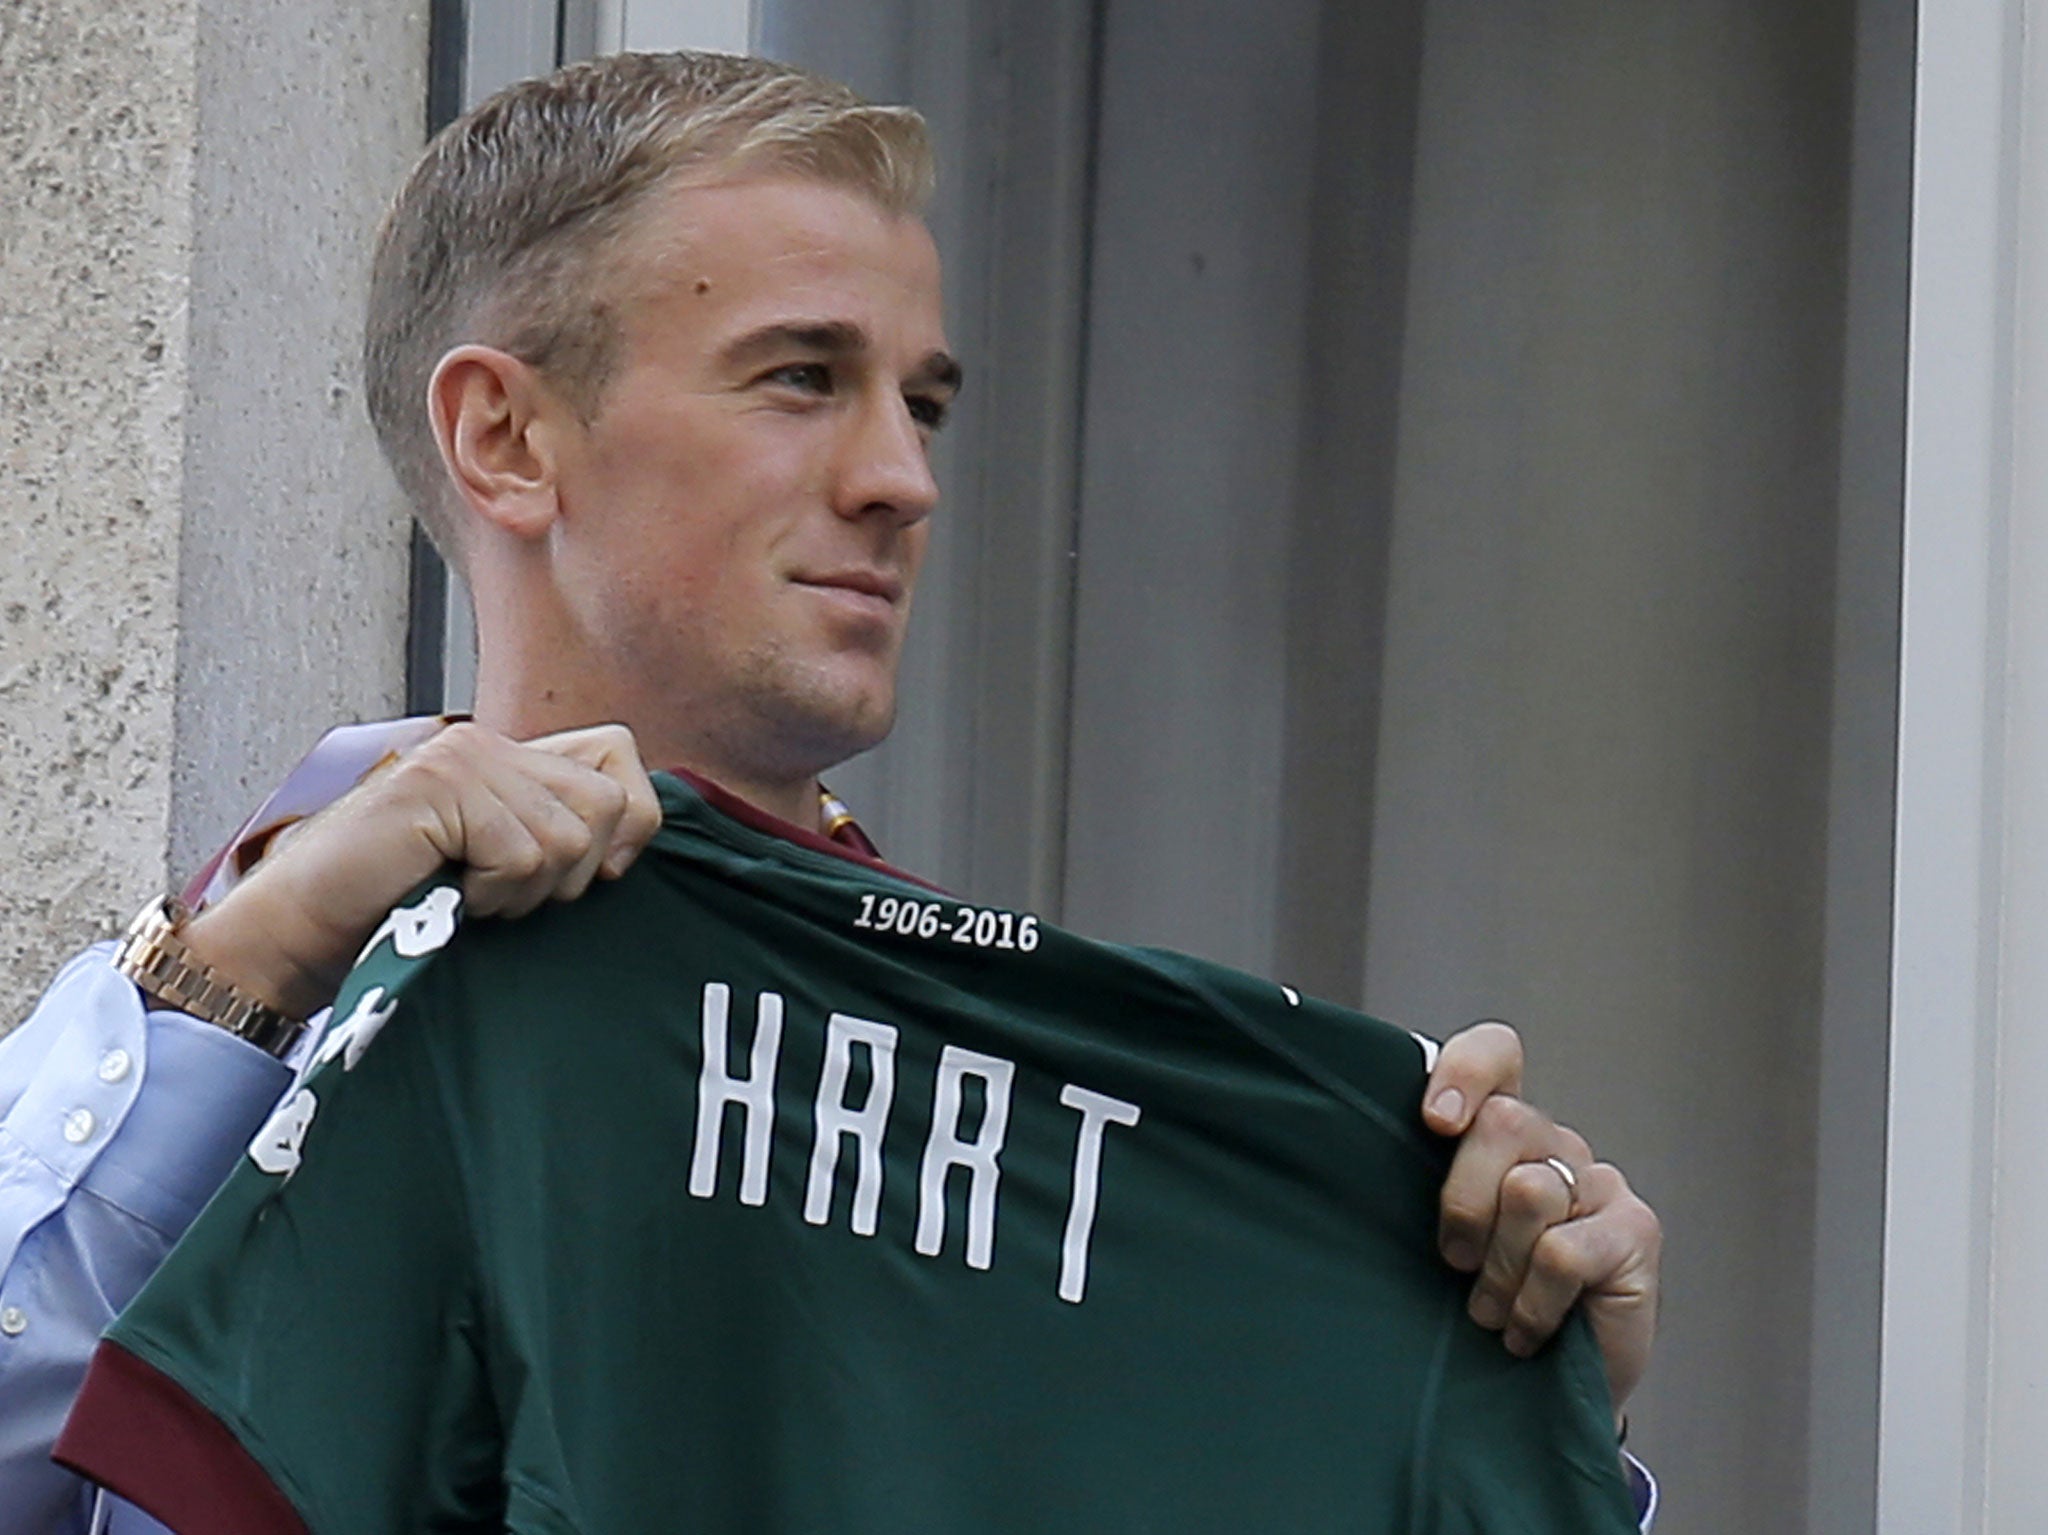 Joe Hart has arrived in Turin and will be confirmed as a Torino player later today